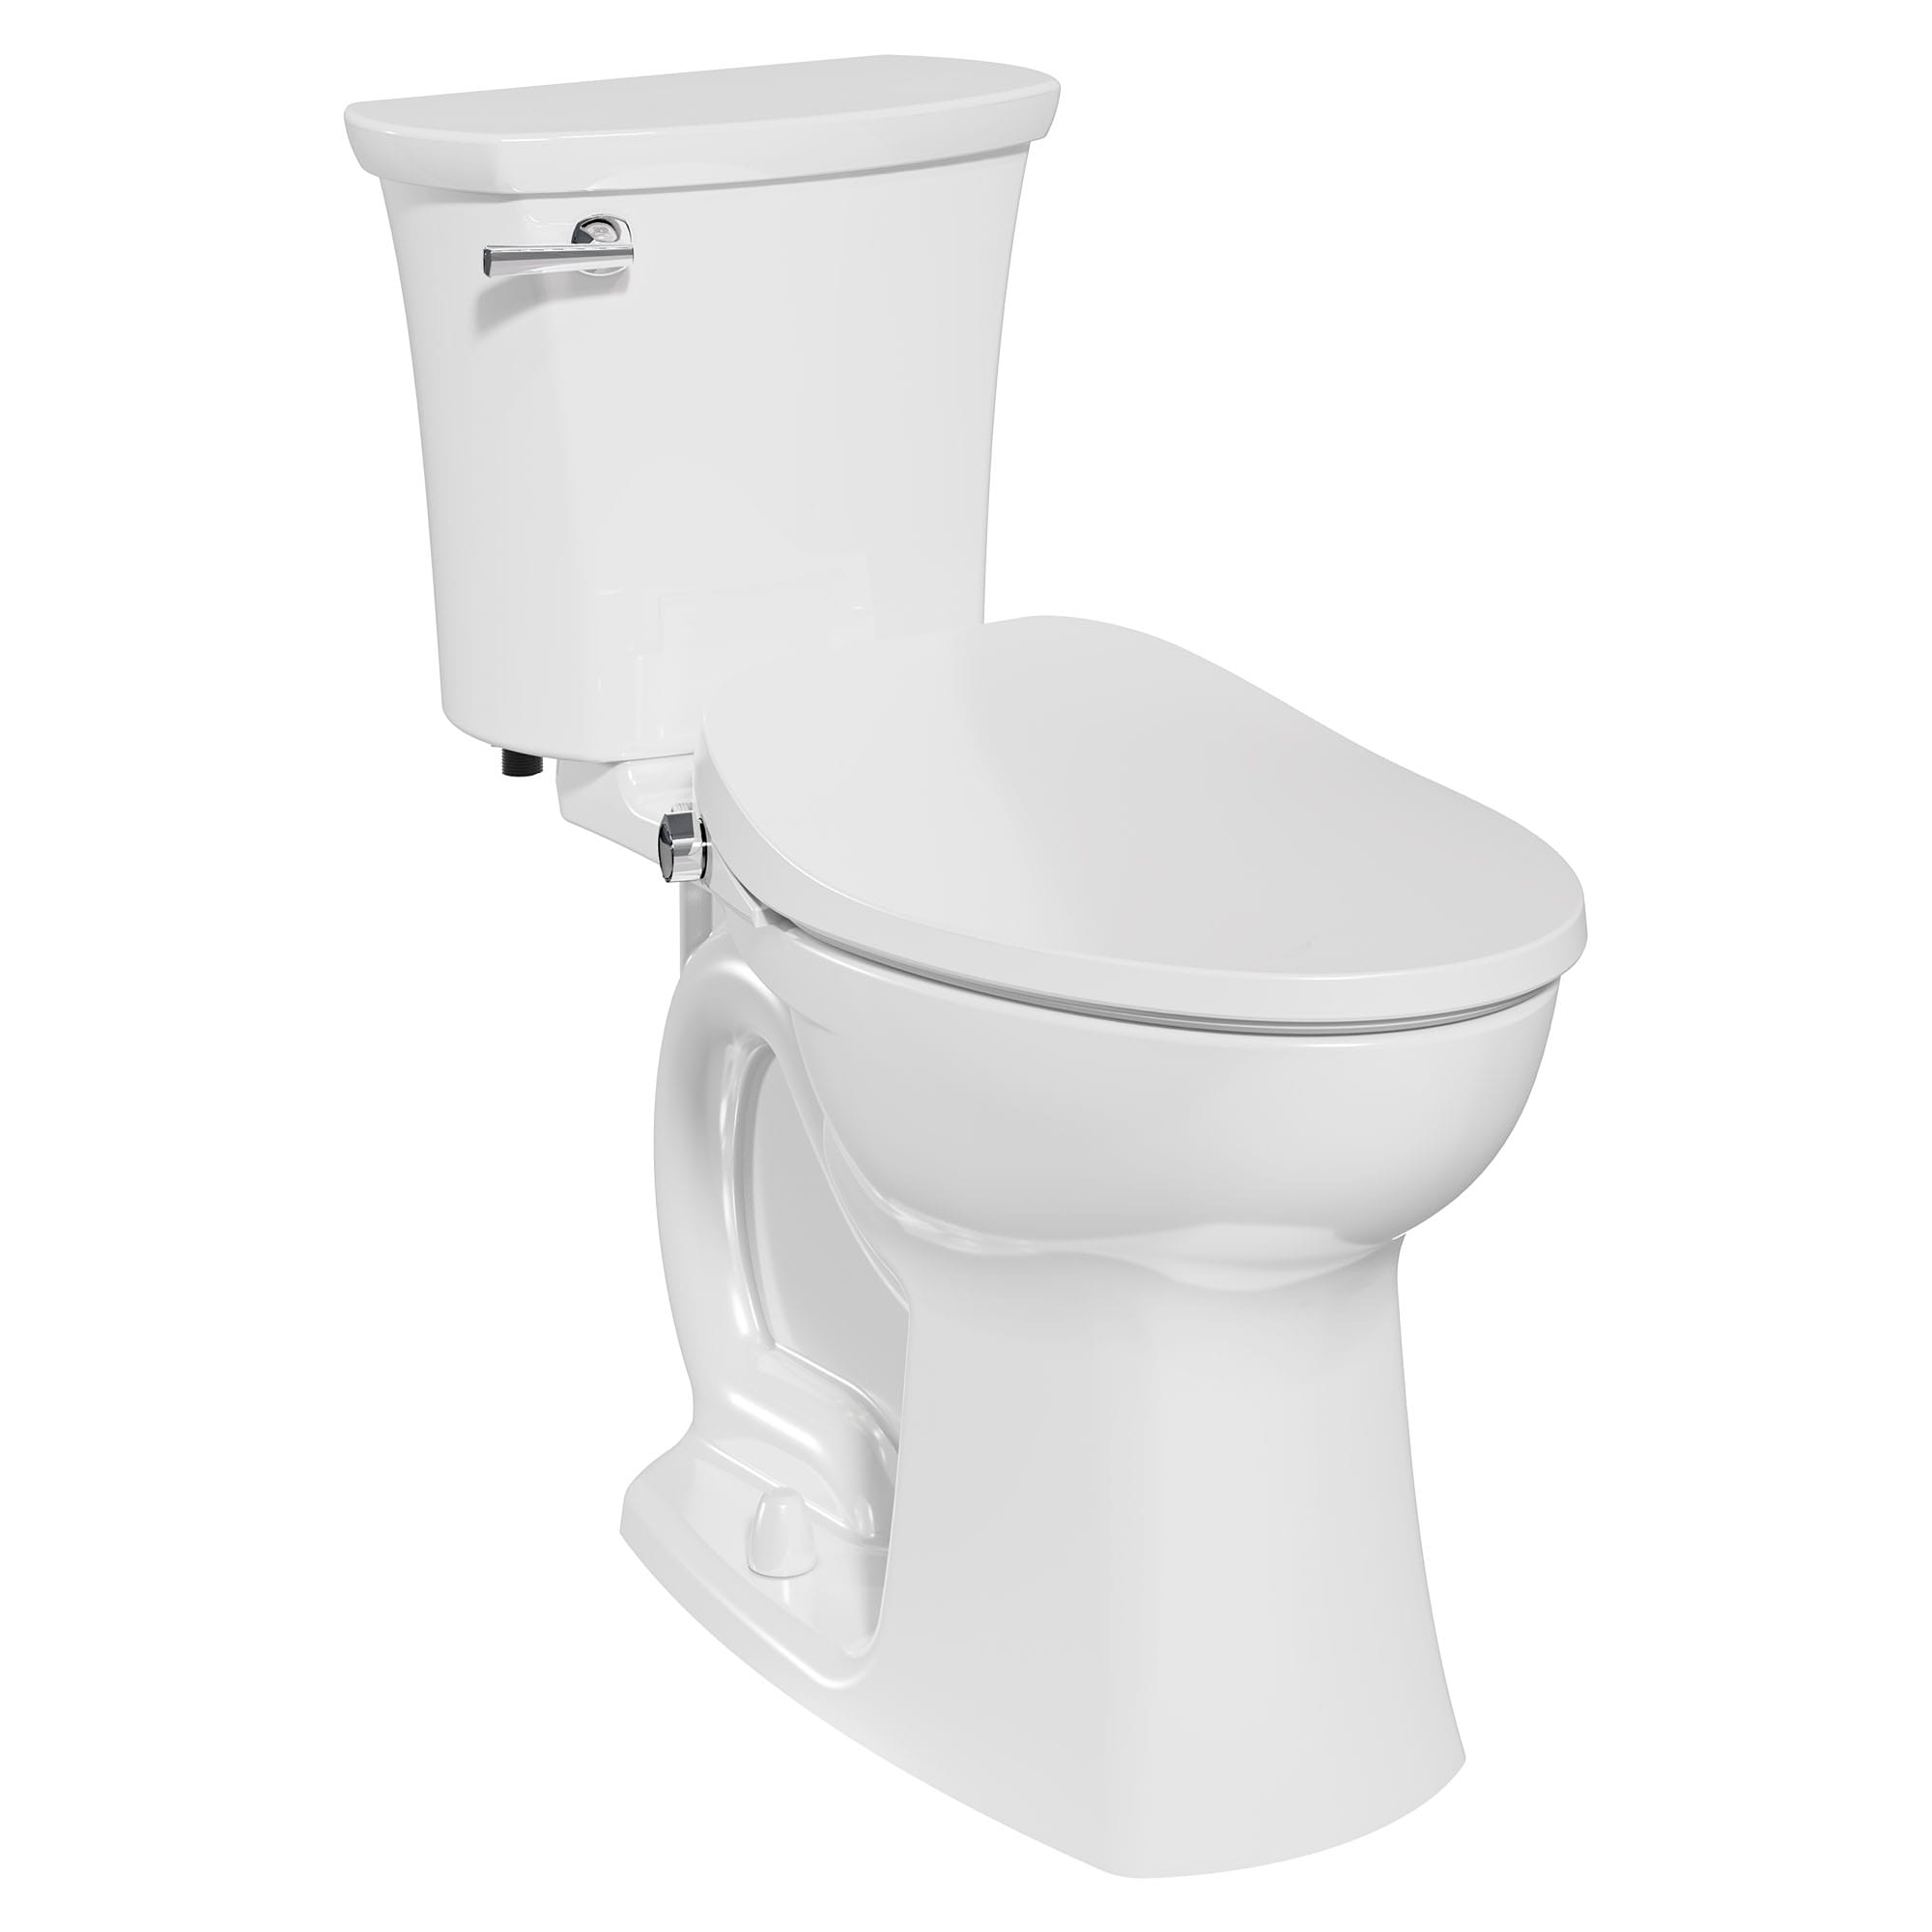 AquaWash® 2.0 SpaLet® Bidet Seat and Edgemere® Chair Height Elongated 1.28 gpf/4.8 Lpf Toilet Combo